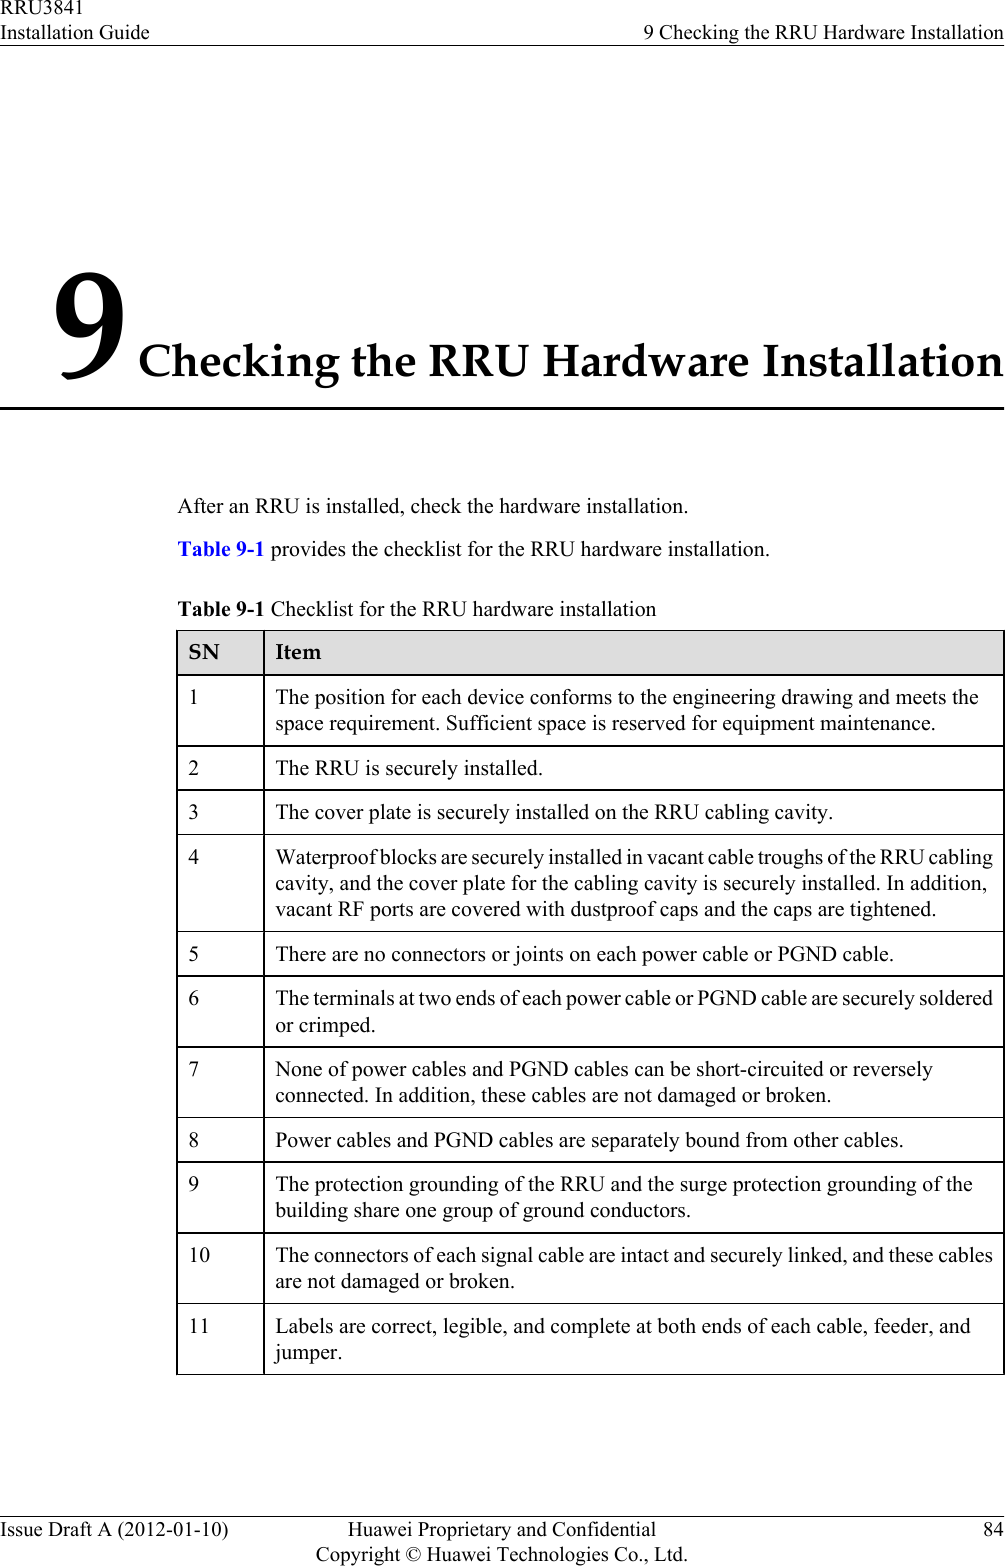 9 Checking the RRU Hardware InstallationAfter an RRU is installed, check the hardware installation.Table 9-1 provides the checklist for the RRU hardware installation.Table 9-1 Checklist for the RRU hardware installationSN Item1The position for each device conforms to the engineering drawing and meets thespace requirement. Sufficient space is reserved for equipment maintenance.2 The RRU is securely installed.3 The cover plate is securely installed on the RRU cabling cavity.4 Waterproof blocks are securely installed in vacant cable troughs of the RRU cablingcavity, and the cover plate for the cabling cavity is securely installed. In addition,vacant RF ports are covered with dustproof caps and the caps are tightened.5 There are no connectors or joints on each power cable or PGND cable.6 The terminals at two ends of each power cable or PGND cable are securely solderedor crimped.7 None of power cables and PGND cables can be short-circuited or reverselyconnected. In addition, these cables are not damaged or broken.8 Power cables and PGND cables are separately bound from other cables.9 The protection grounding of the RRU and the surge protection grounding of thebuilding share one group of ground conductors.10 The connectors of each signal cable are intact and securely linked, and these cablesare not damaged or broken.11 Labels are correct, legible, and complete at both ends of each cable, feeder, andjumper.RRU3841Installation Guide 9 Checking the RRU Hardware InstallationIssue Draft A (2012-01-10) Huawei Proprietary and ConfidentialCopyright © Huawei Technologies Co., Ltd.84